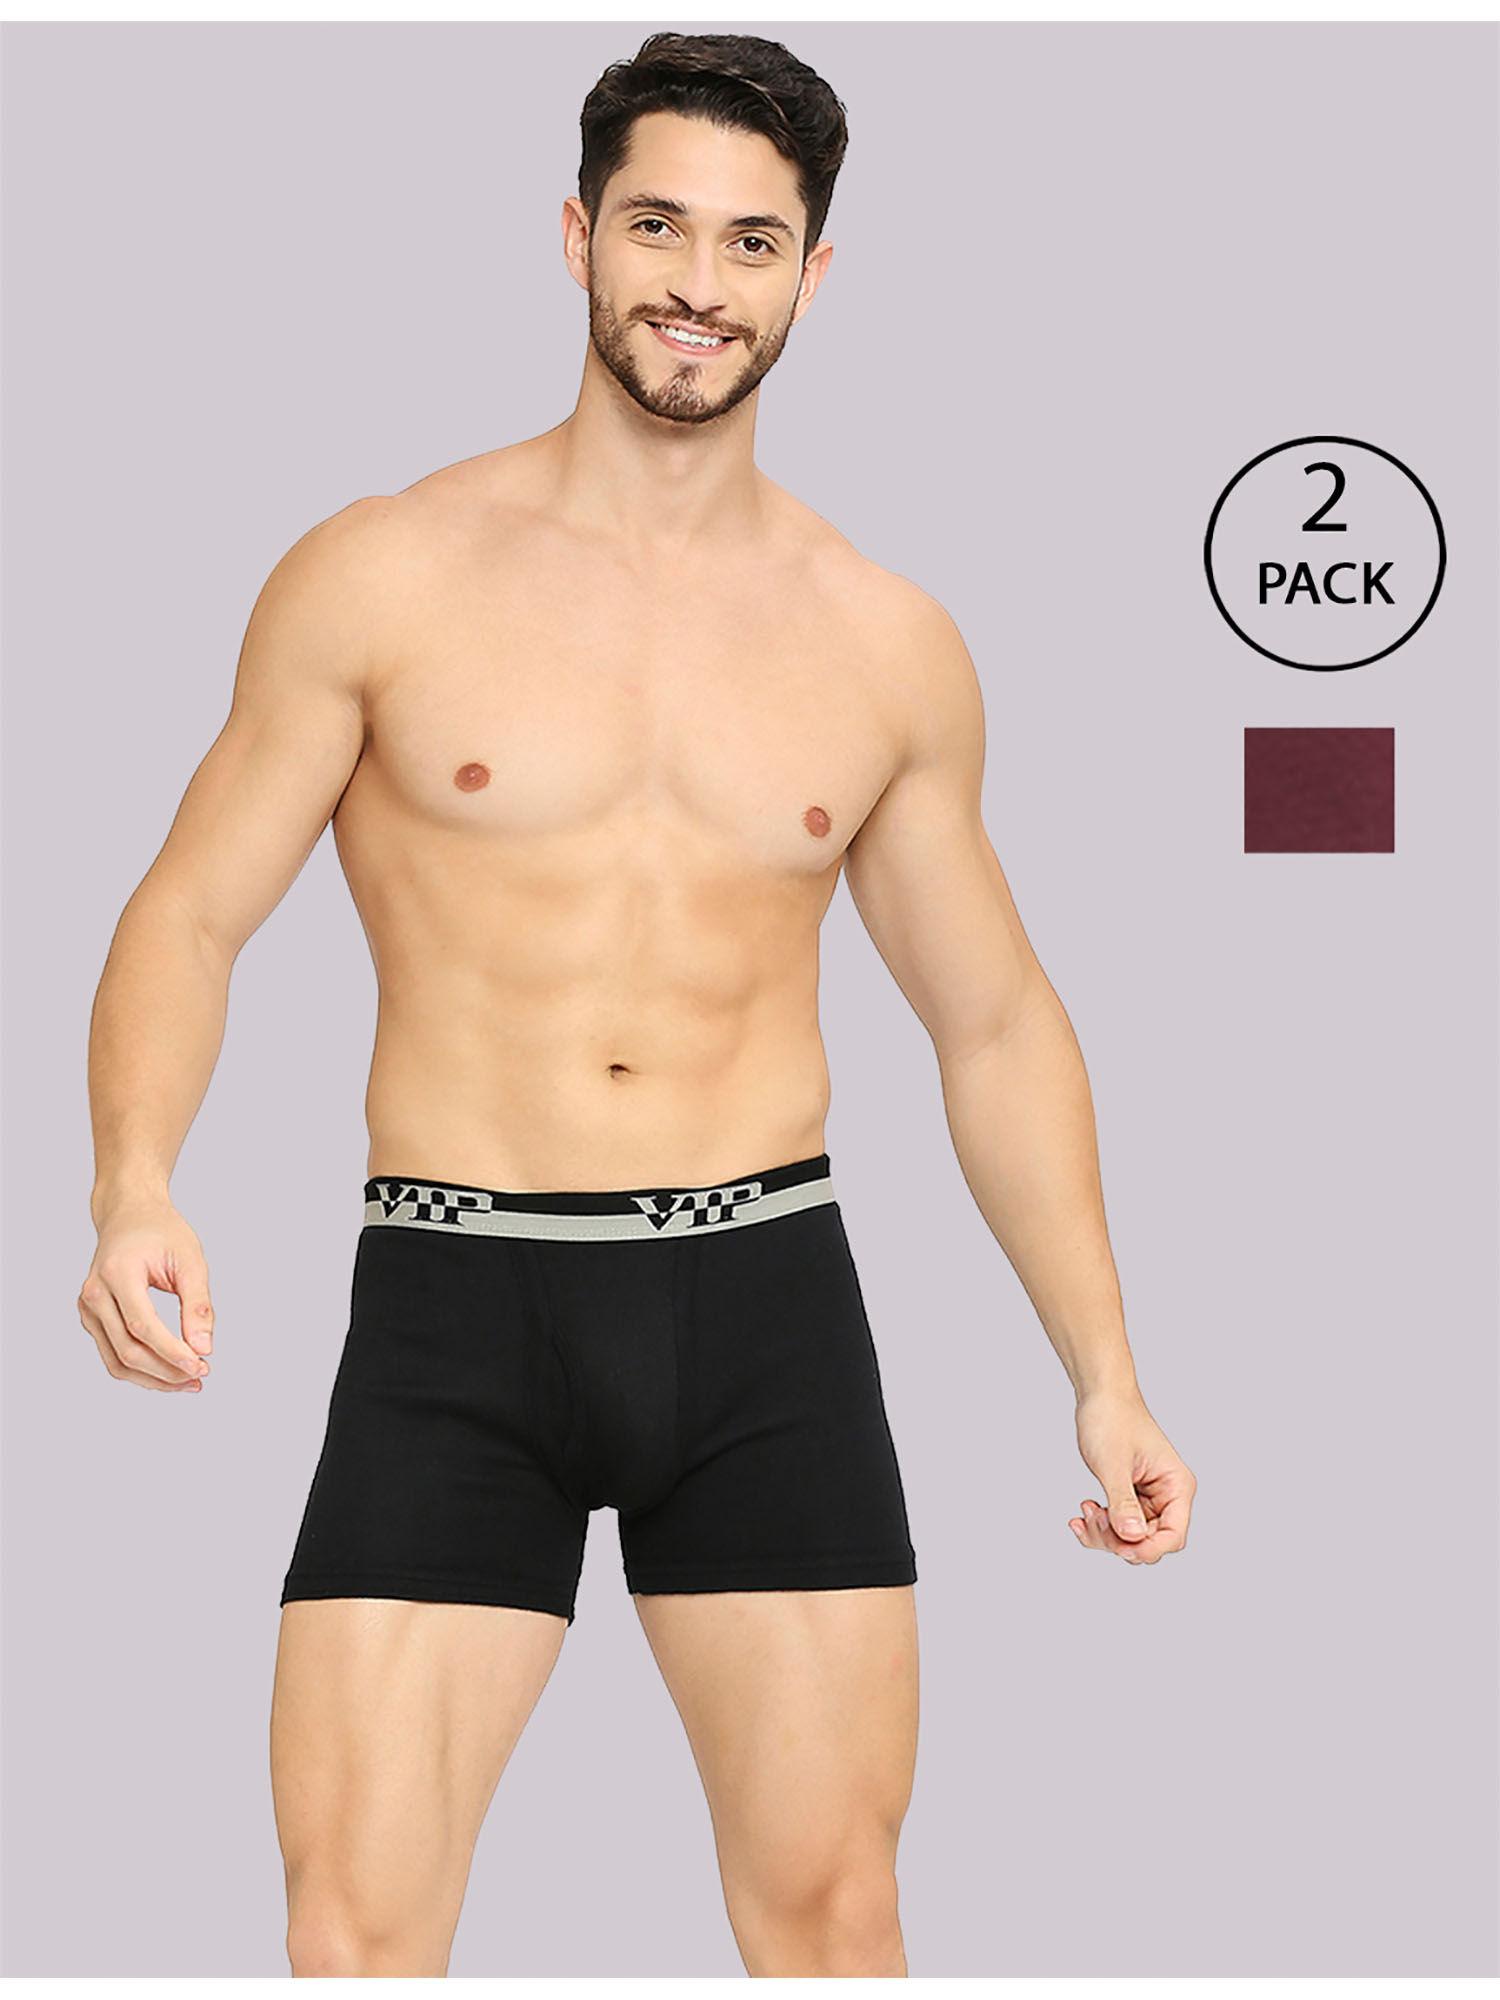 ultra men's essential cotton trunks in assorted colors (pack of 2)